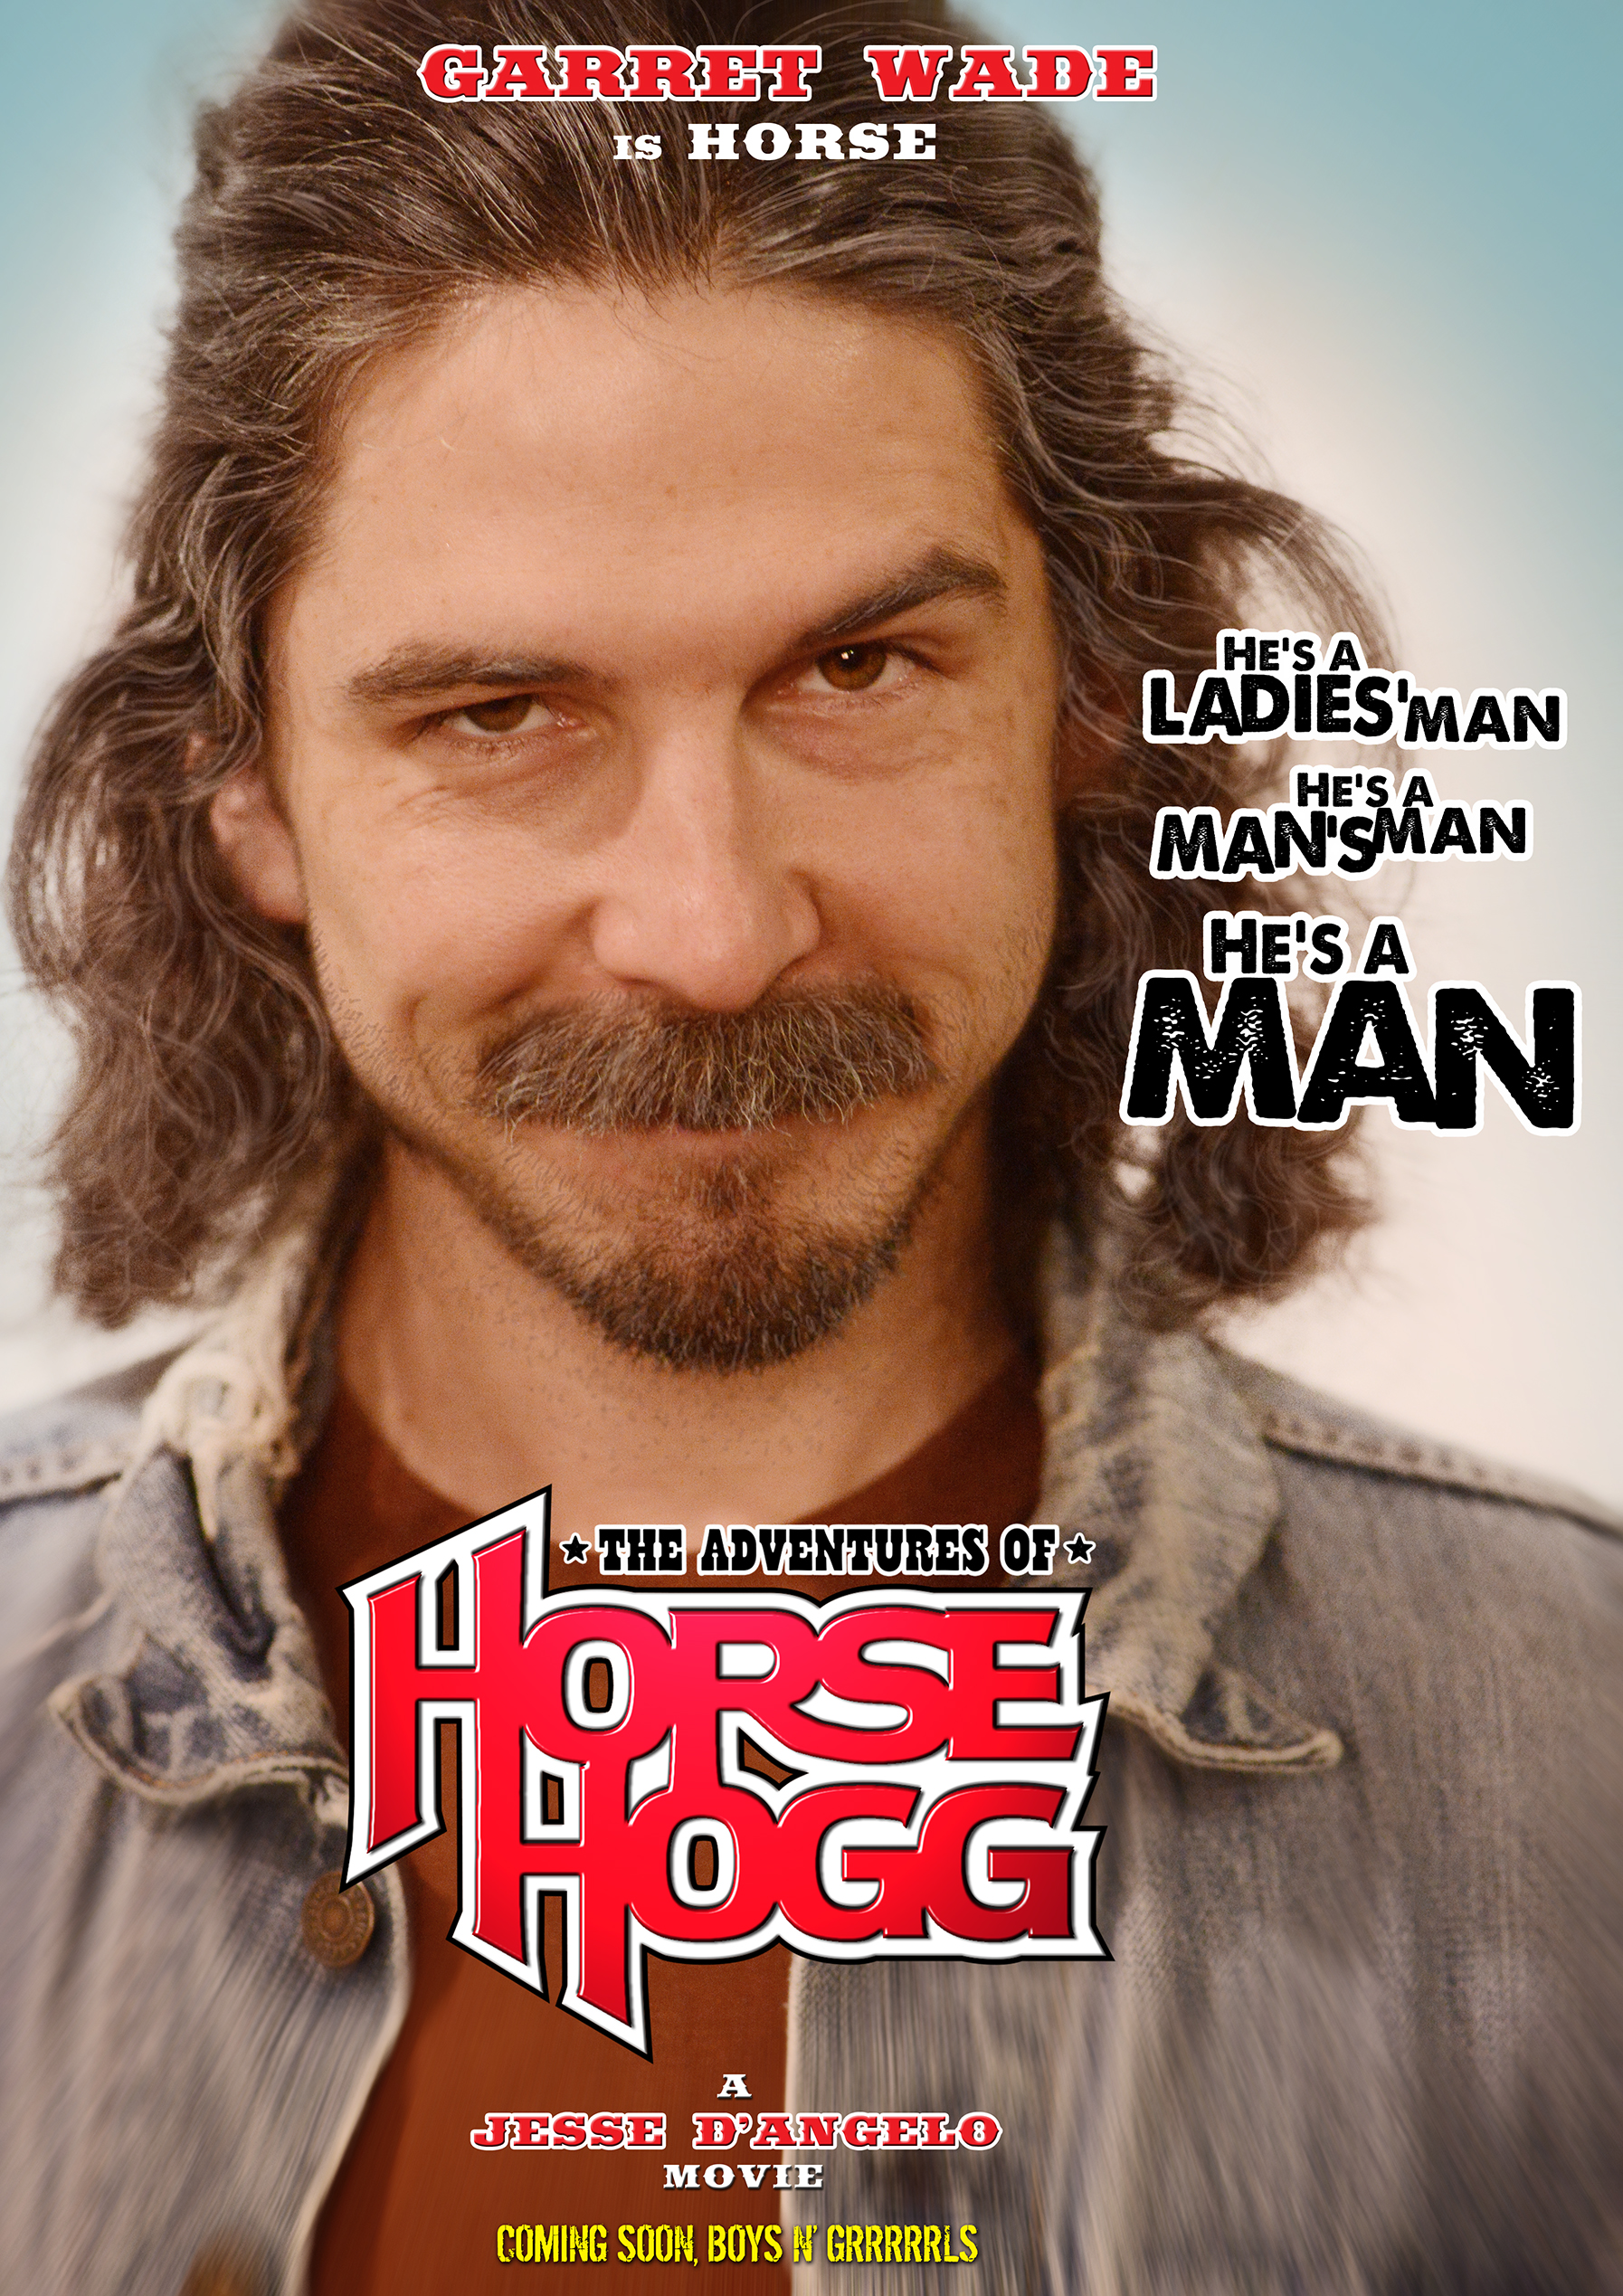 One of the character posters for The Adventures of HORSE HOGG (Oct. 2014)... Starring Garret Wade as Horse Hogg and Ryan Baumann as 